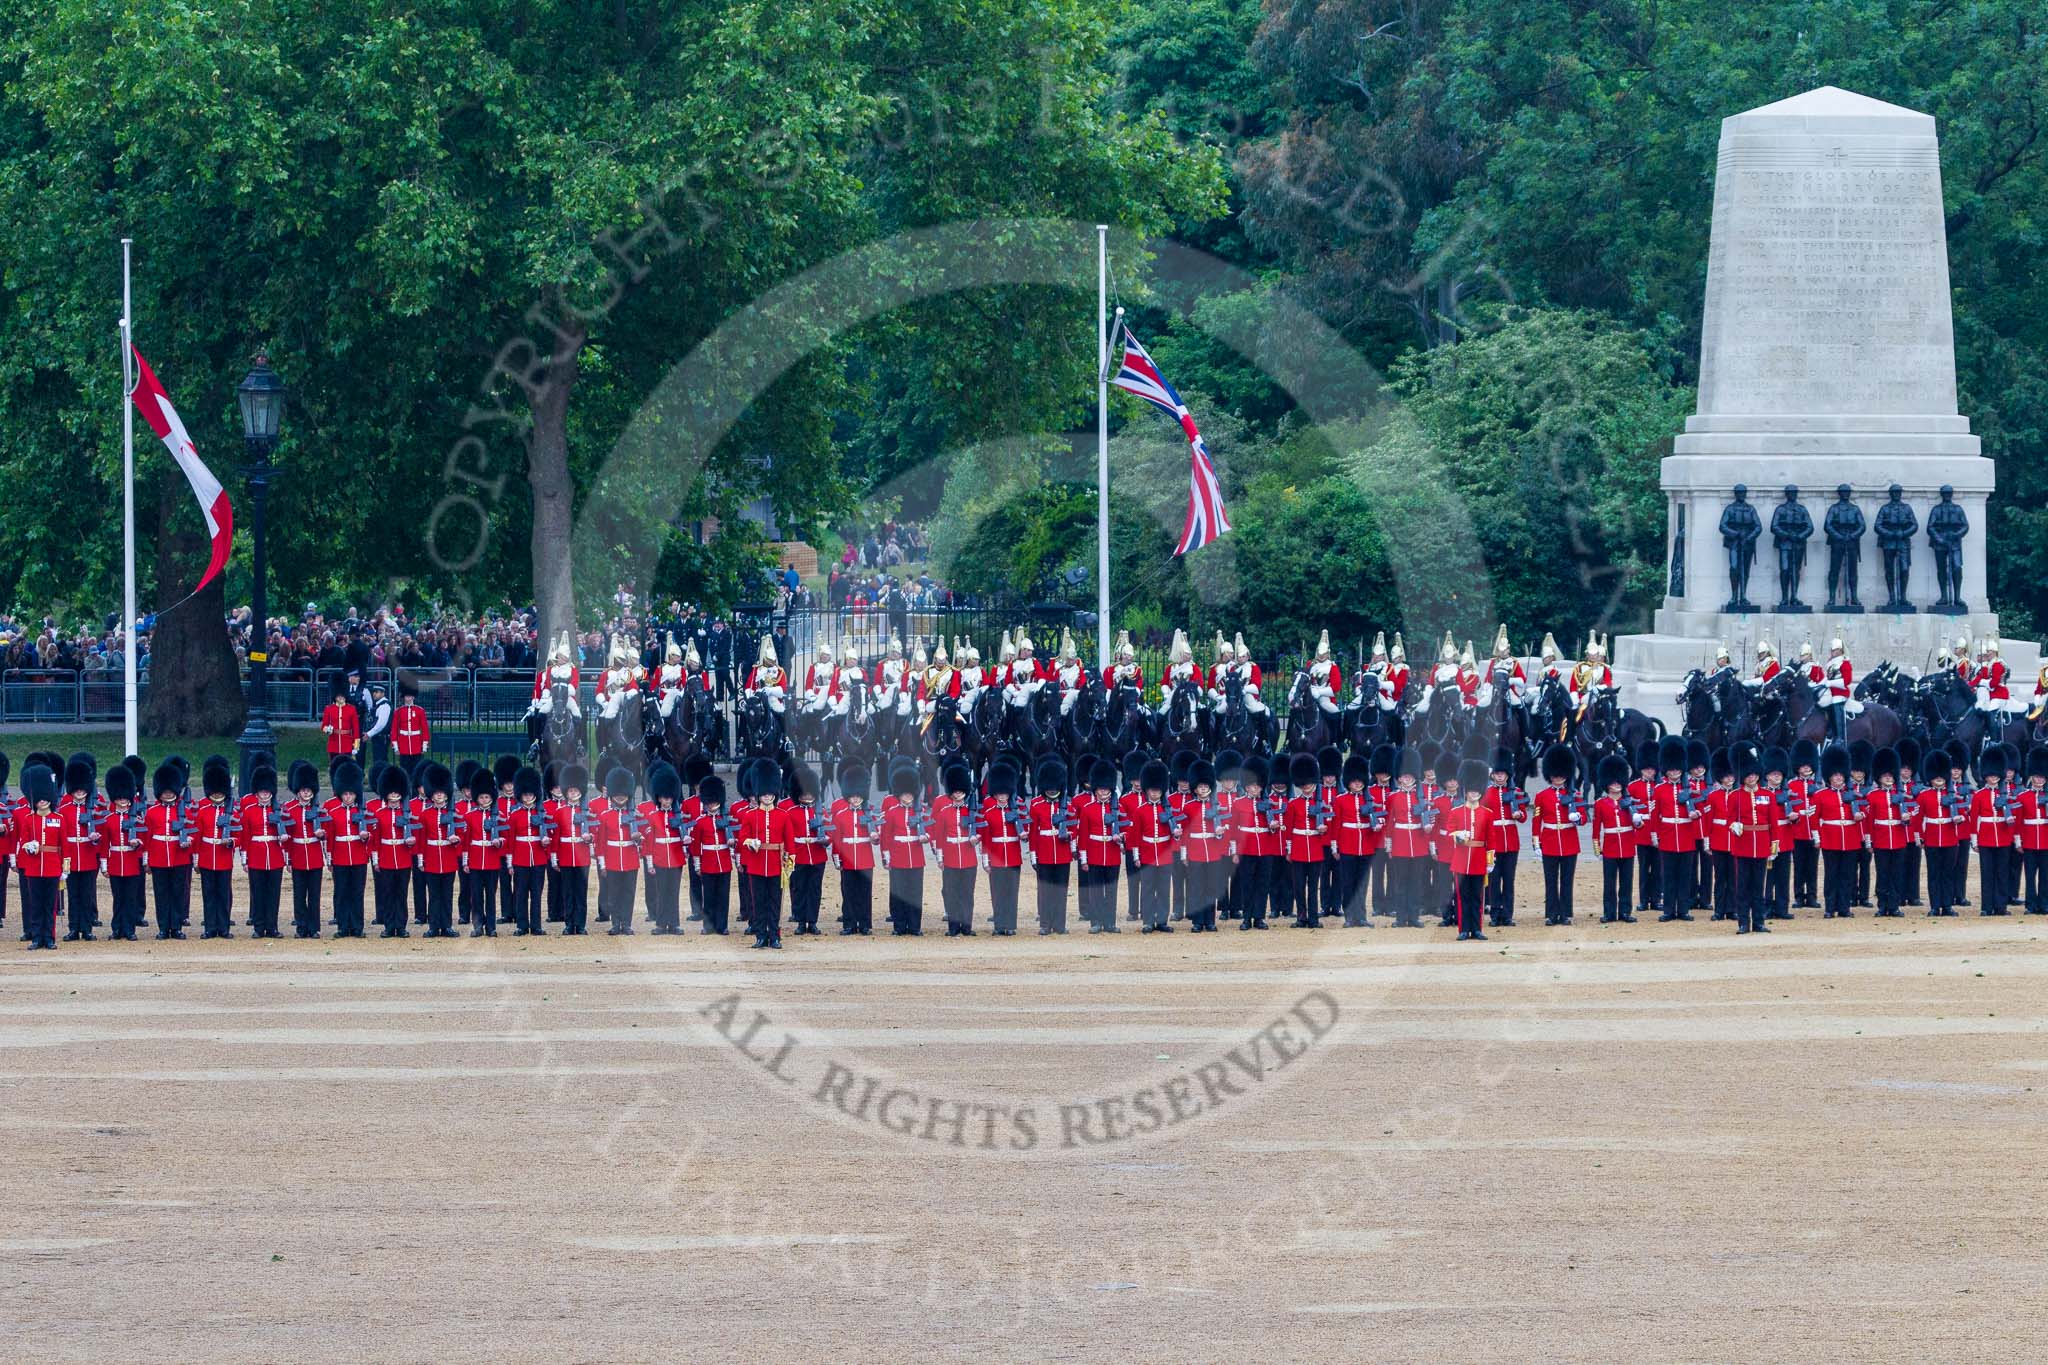 Trooping the Colour 2015. Image #625, 13 June 2015 12:00 Horse Guards Parade, London, UK